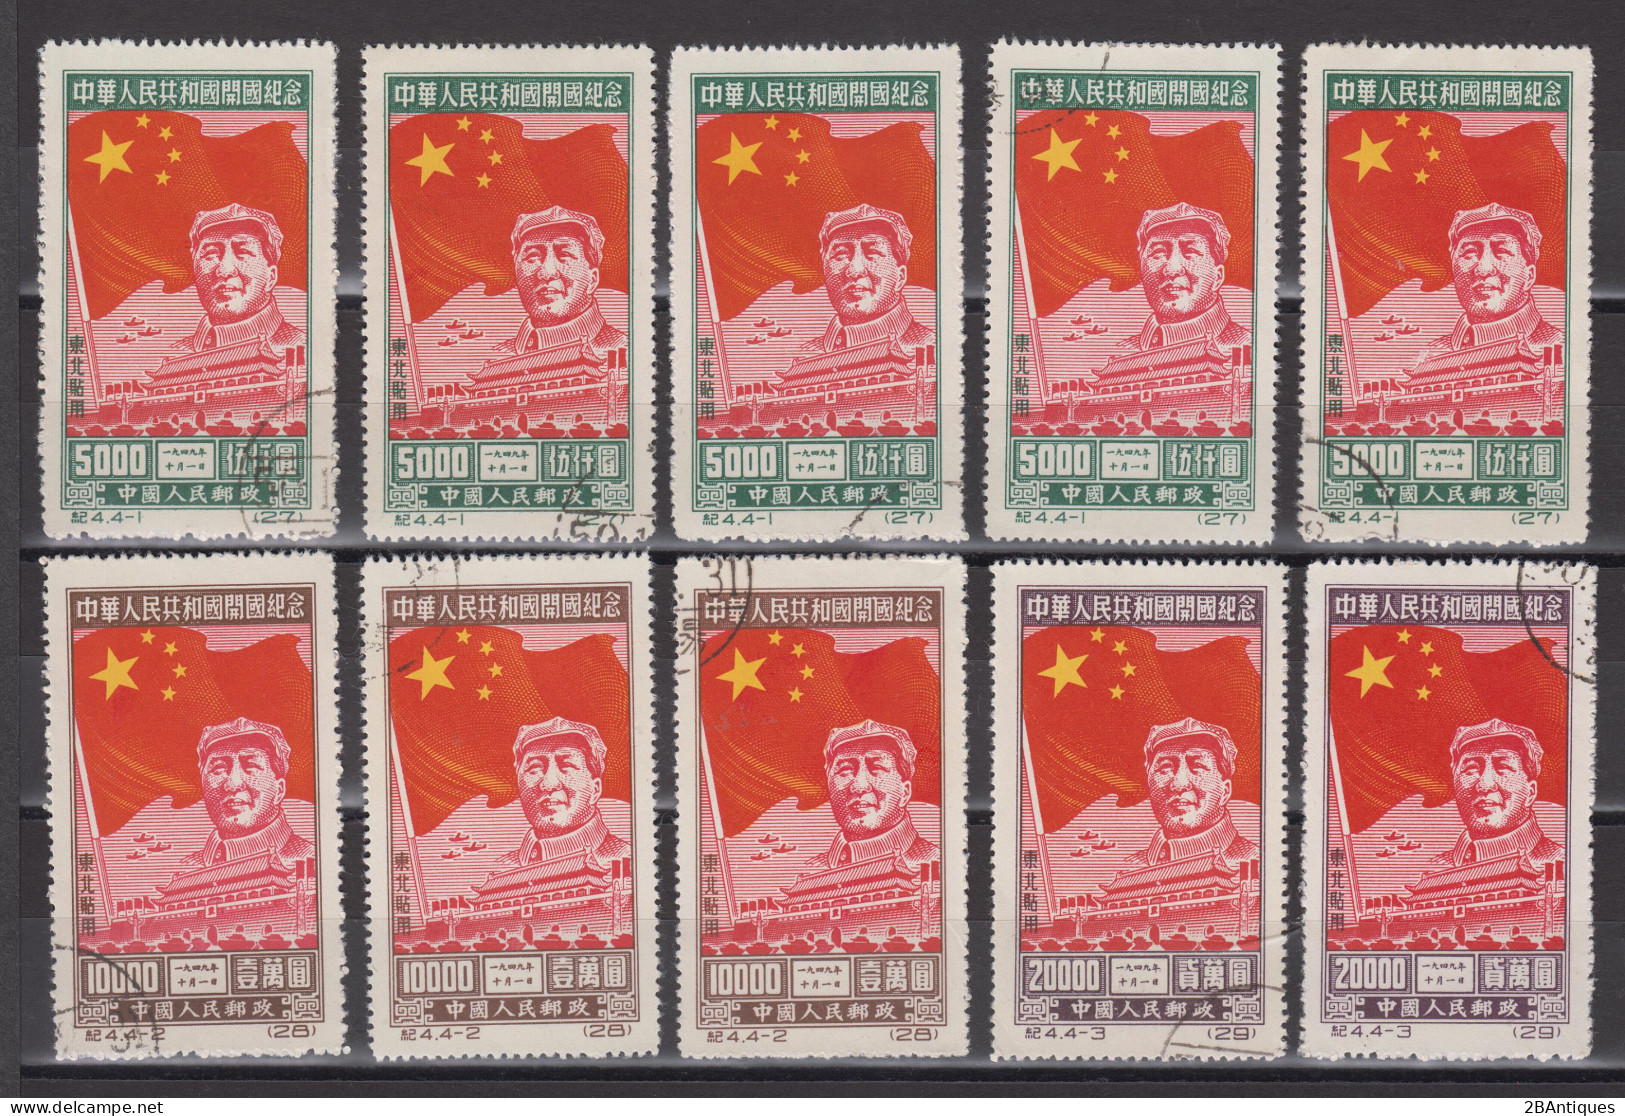 NORTHEAST CHINA 1950 - Mao CTO 10 Stamps - North-Eastern 1946-48